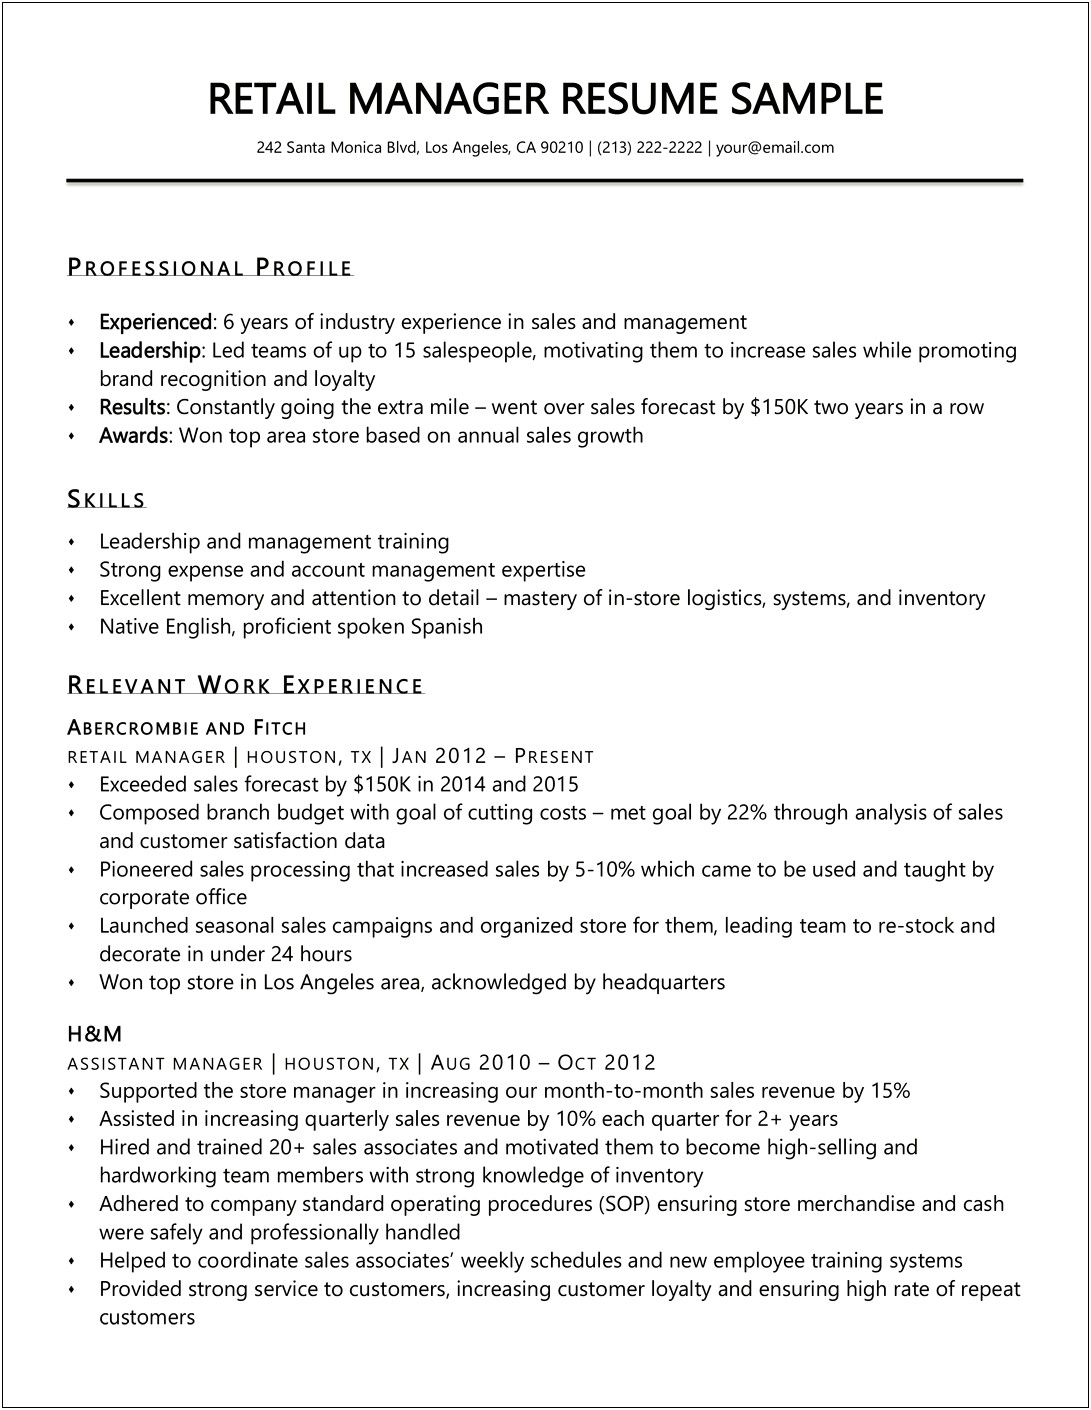 Free Resume Samples For Retail Management